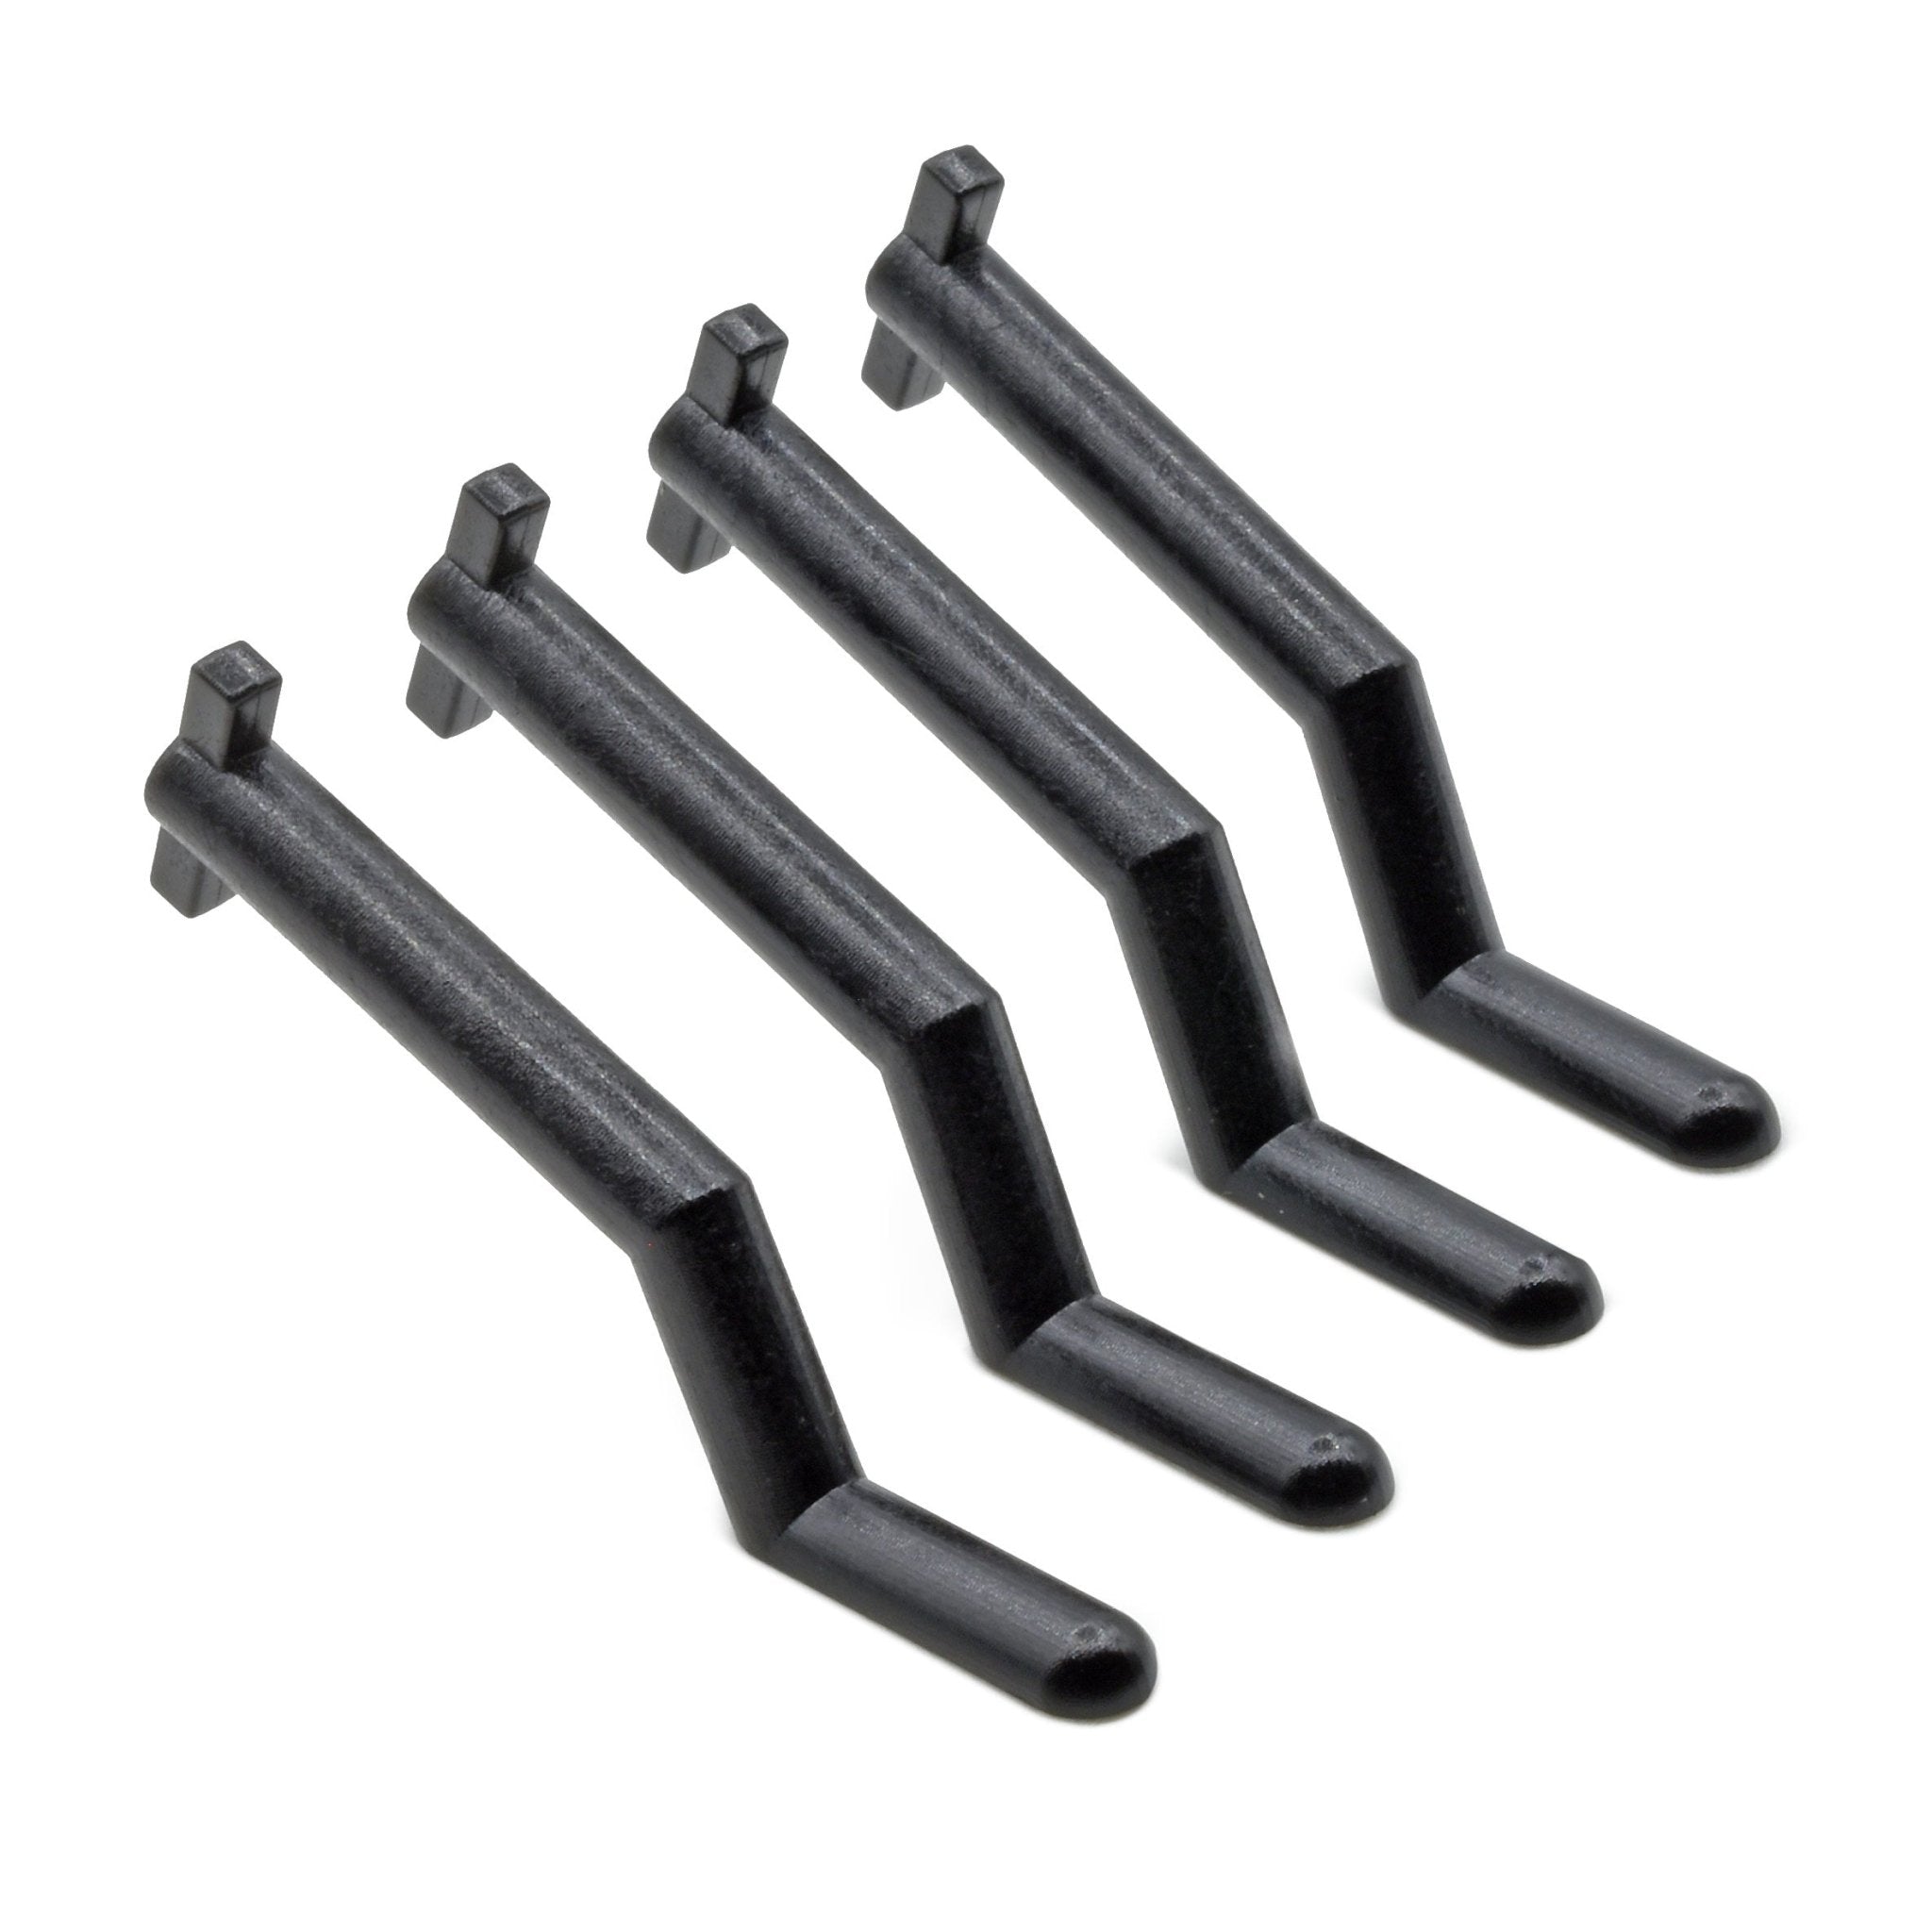 Narrow Tip Replacement Pack, 4 Pieces